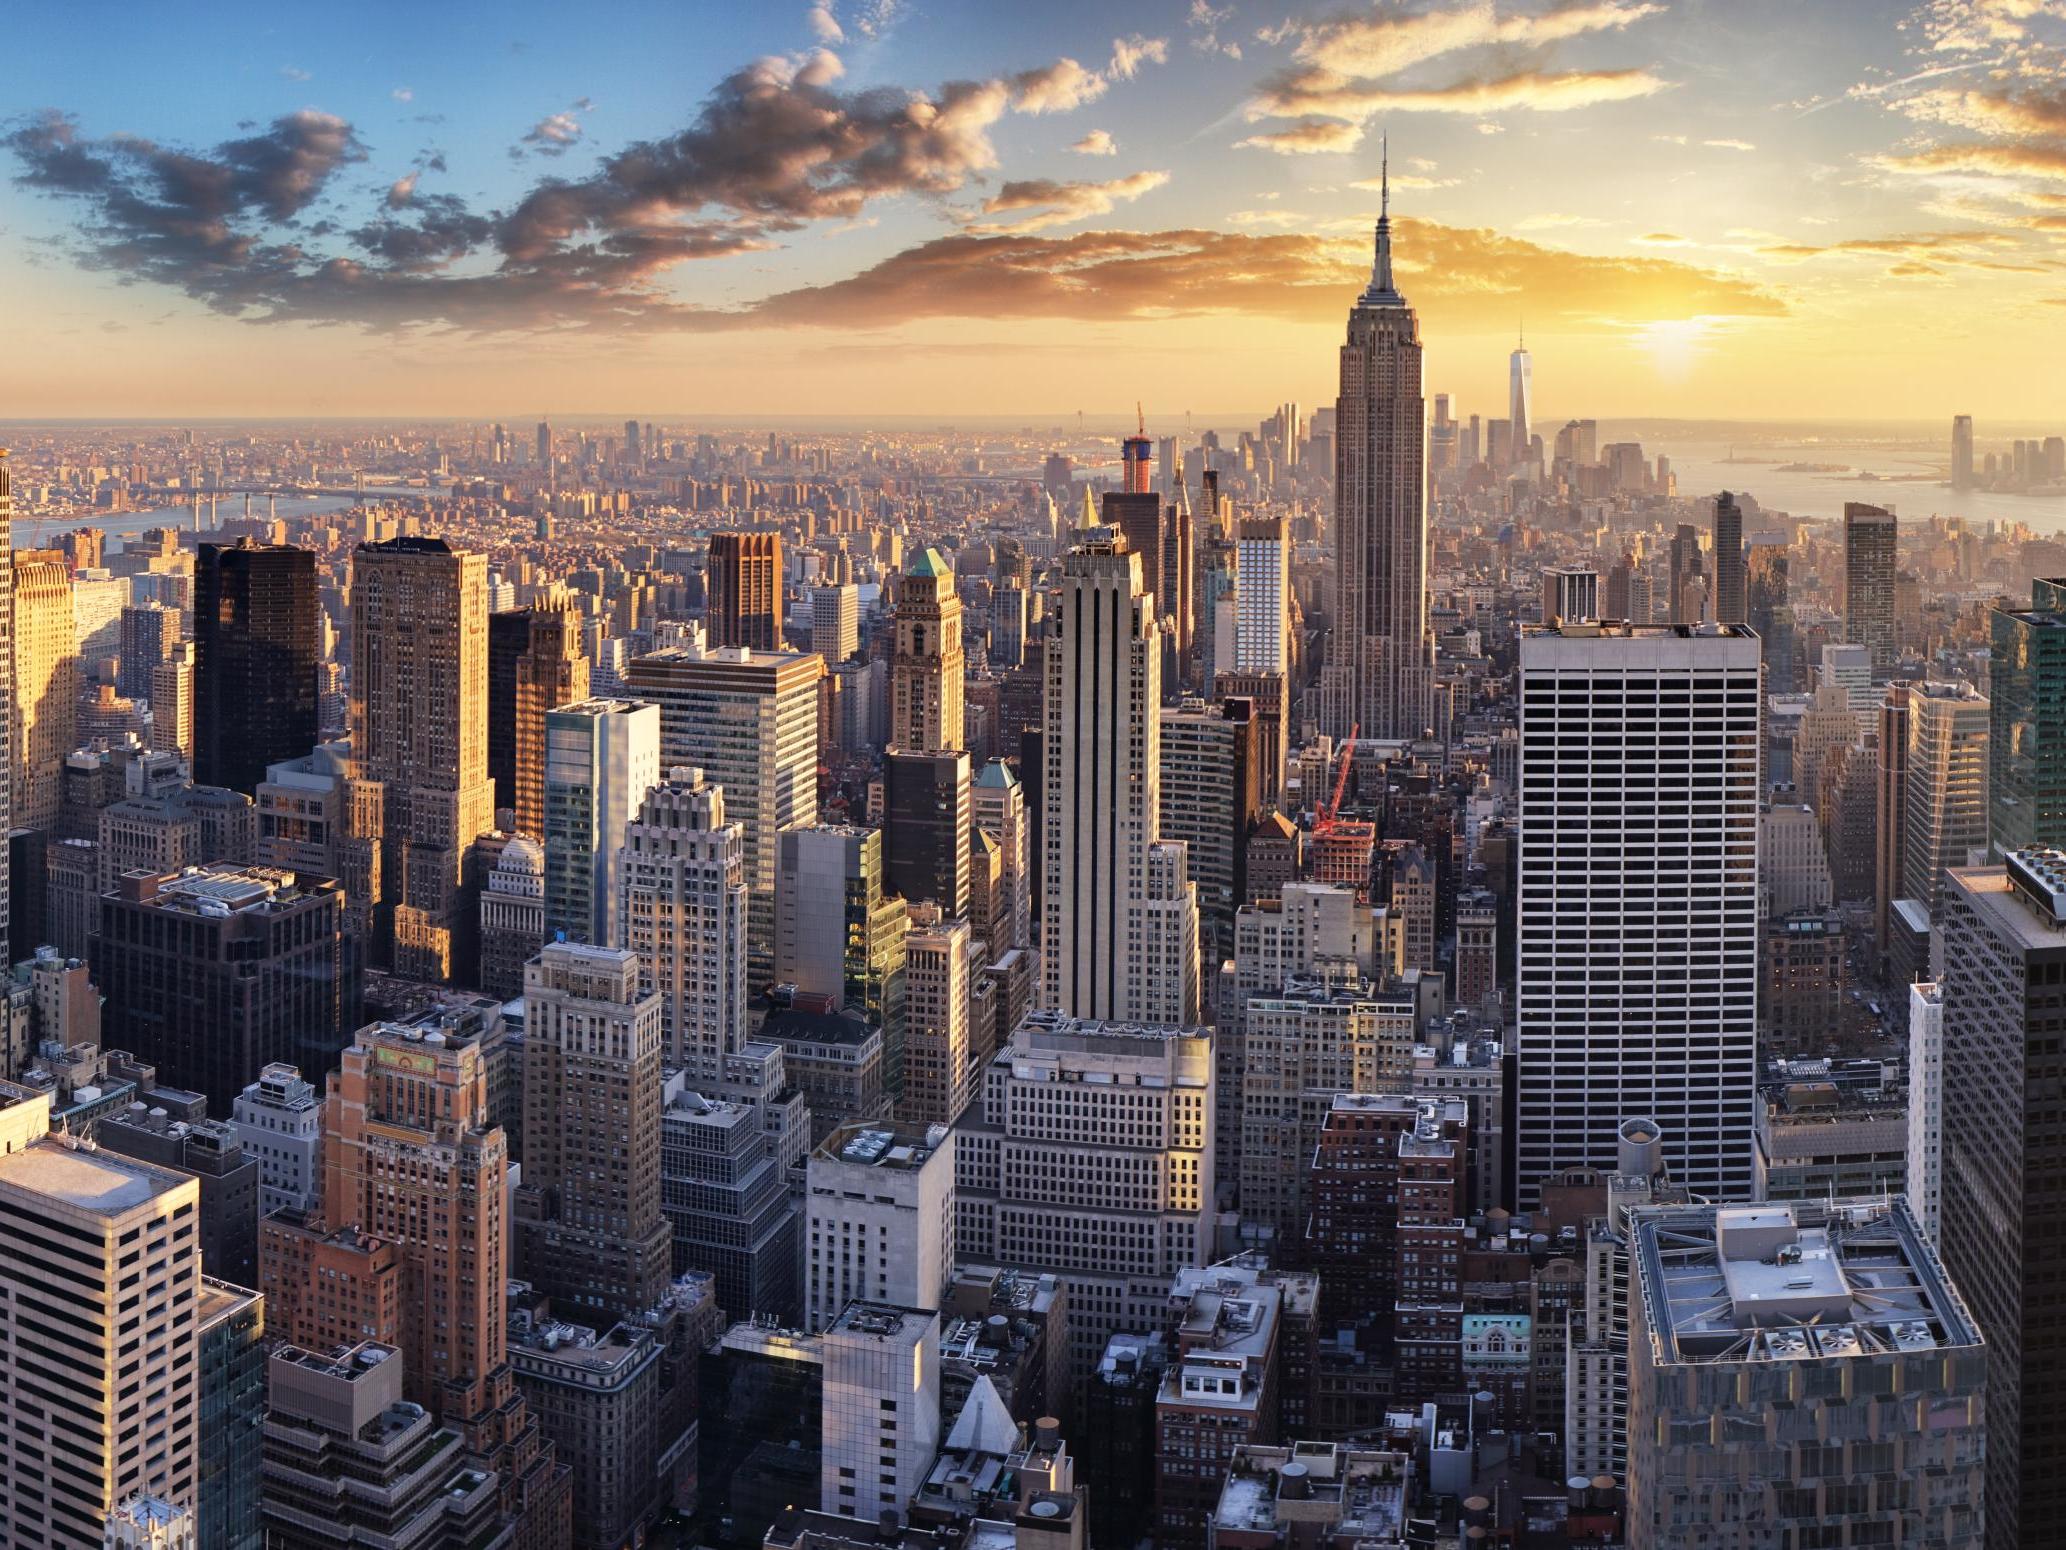 The New York skyline: possible to visit in a day